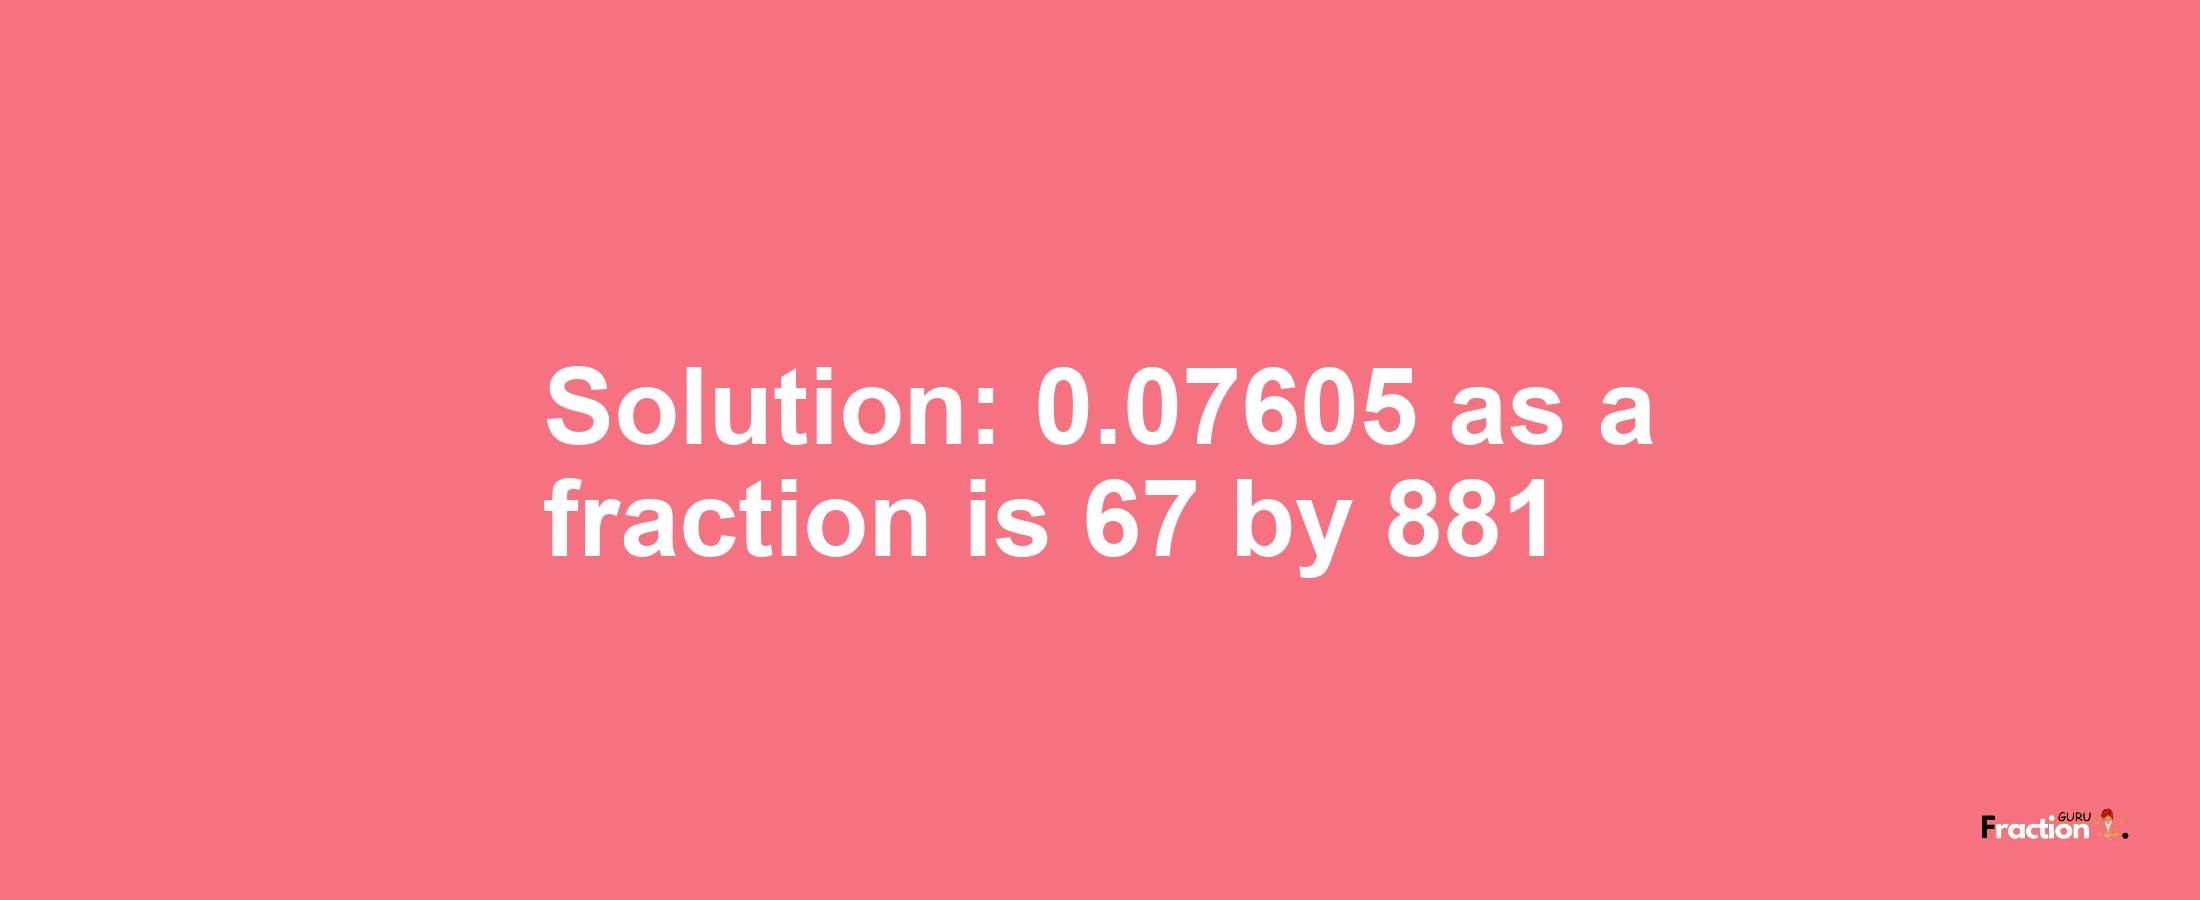 Solution:0.07605 as a fraction is 67/881